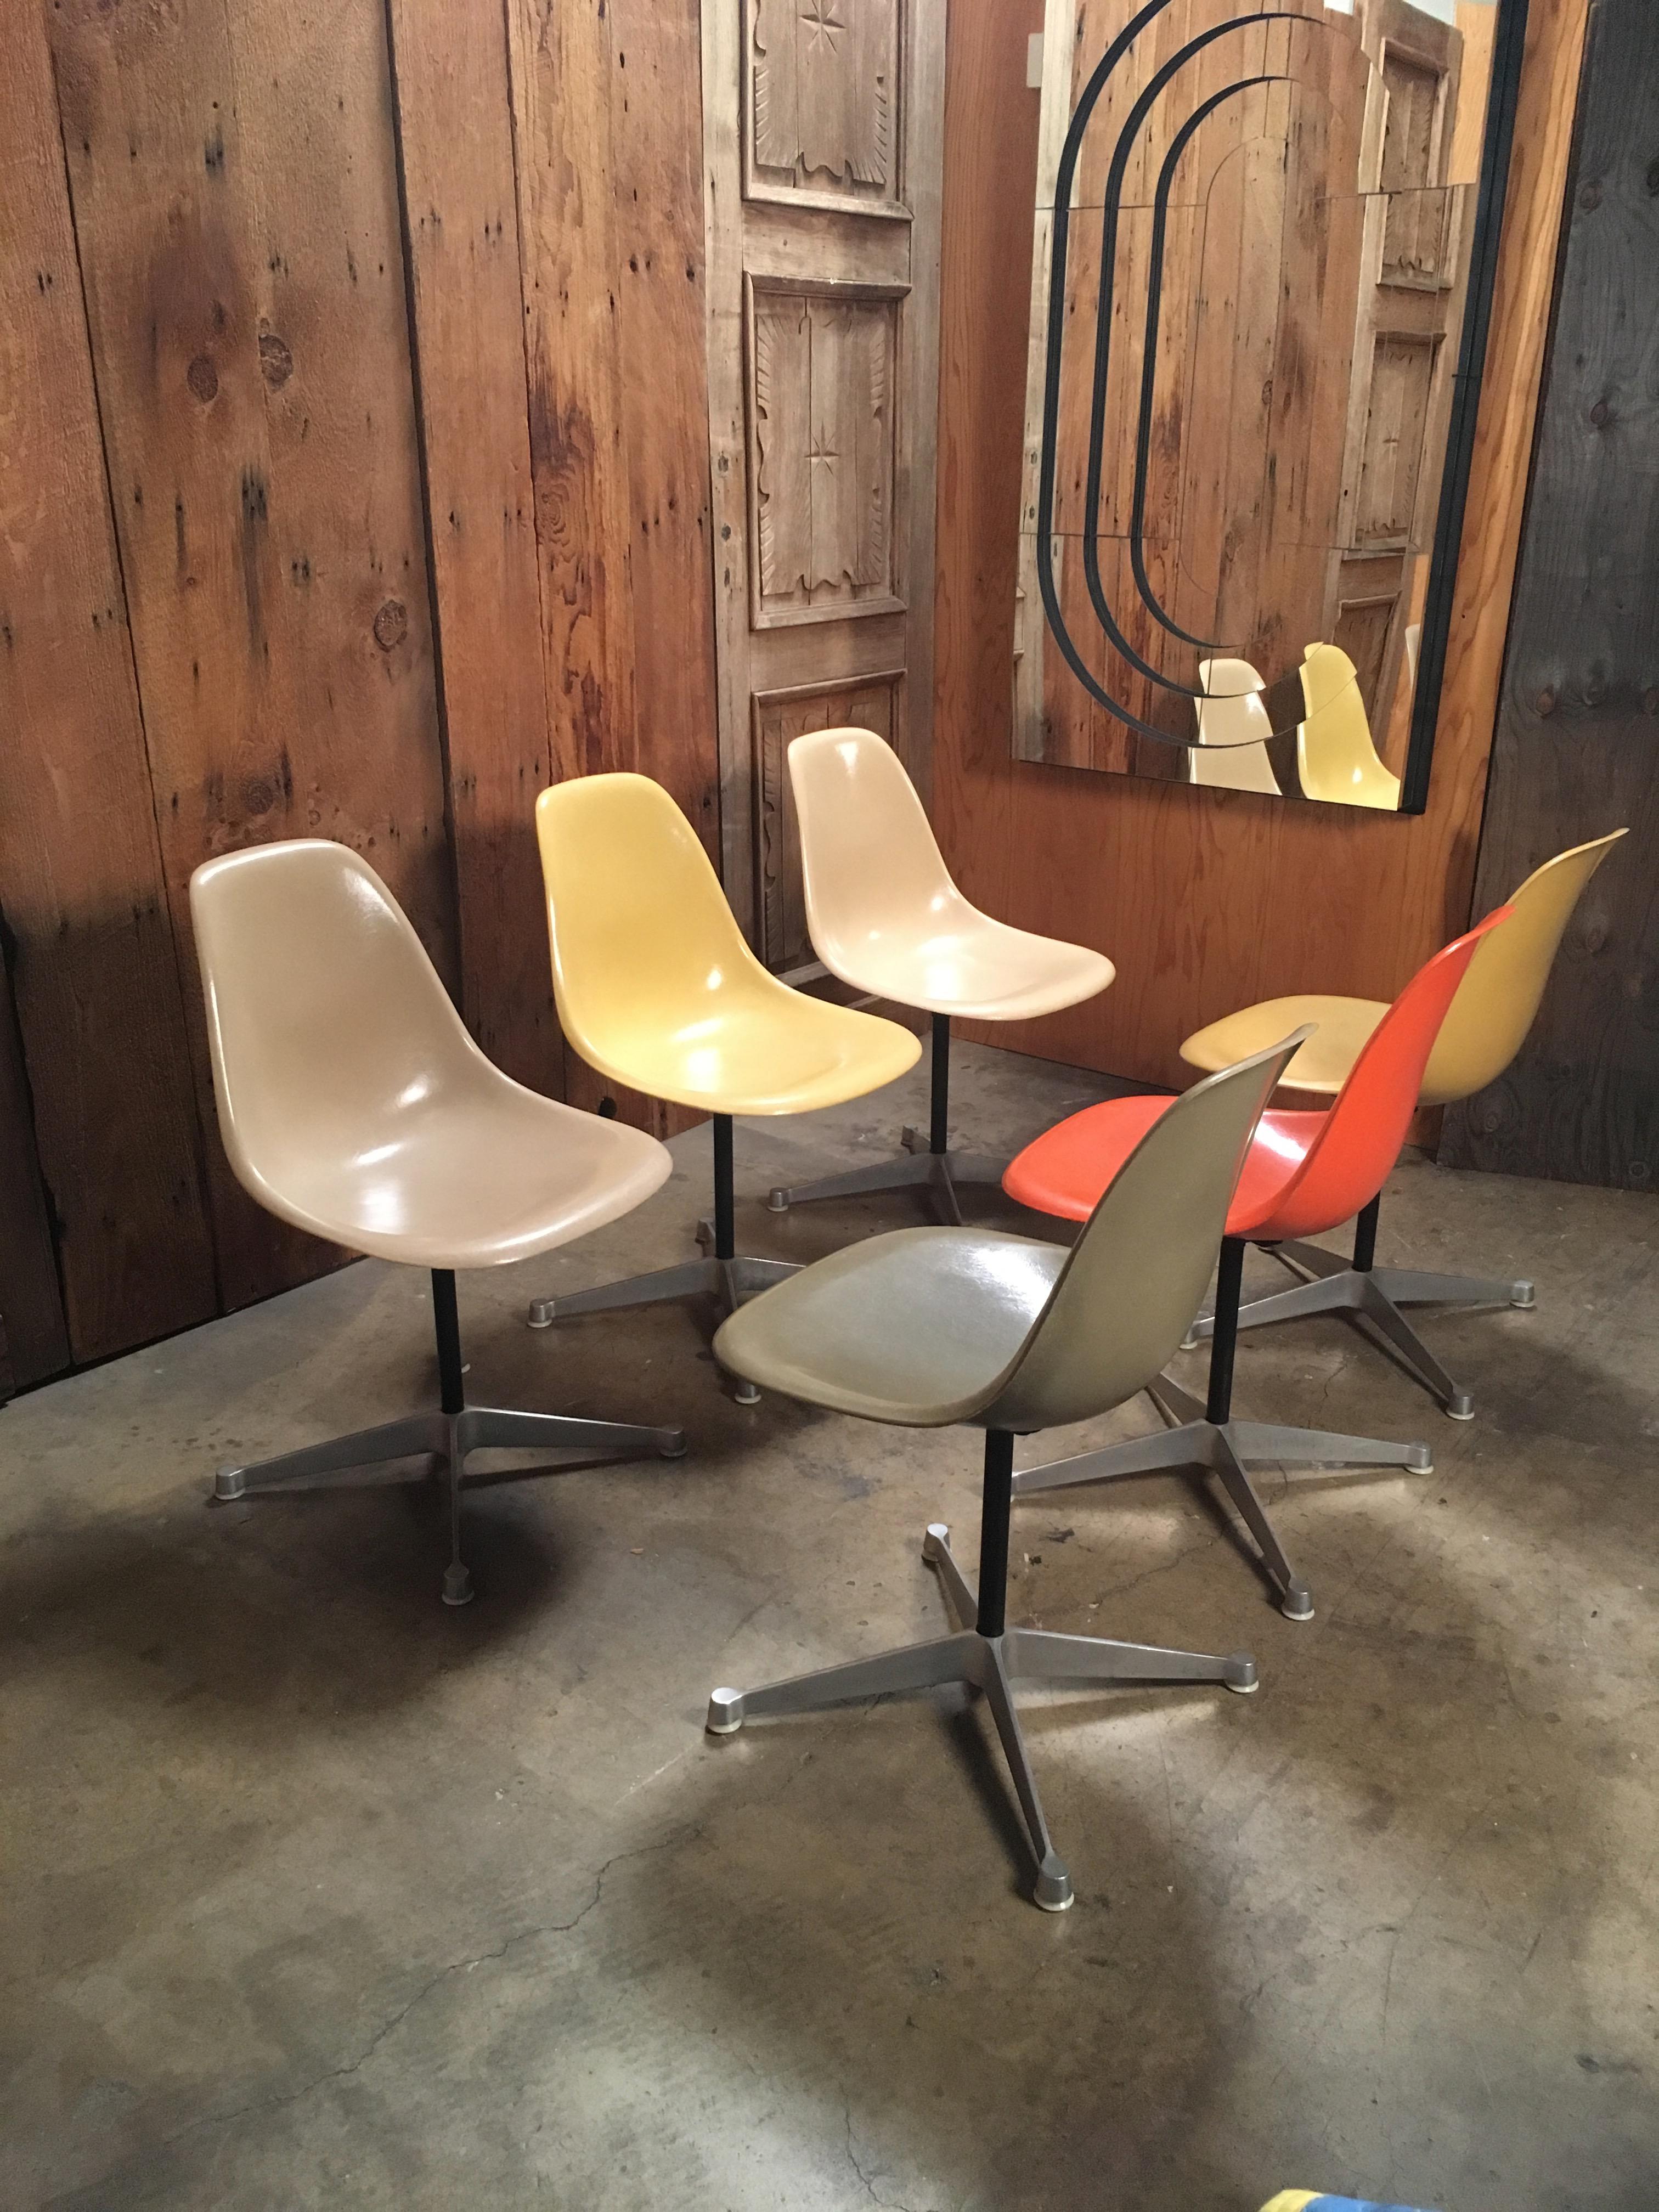 American Multicolored Fiberglass Shell Chairs, Charles Eames for Herman Miller